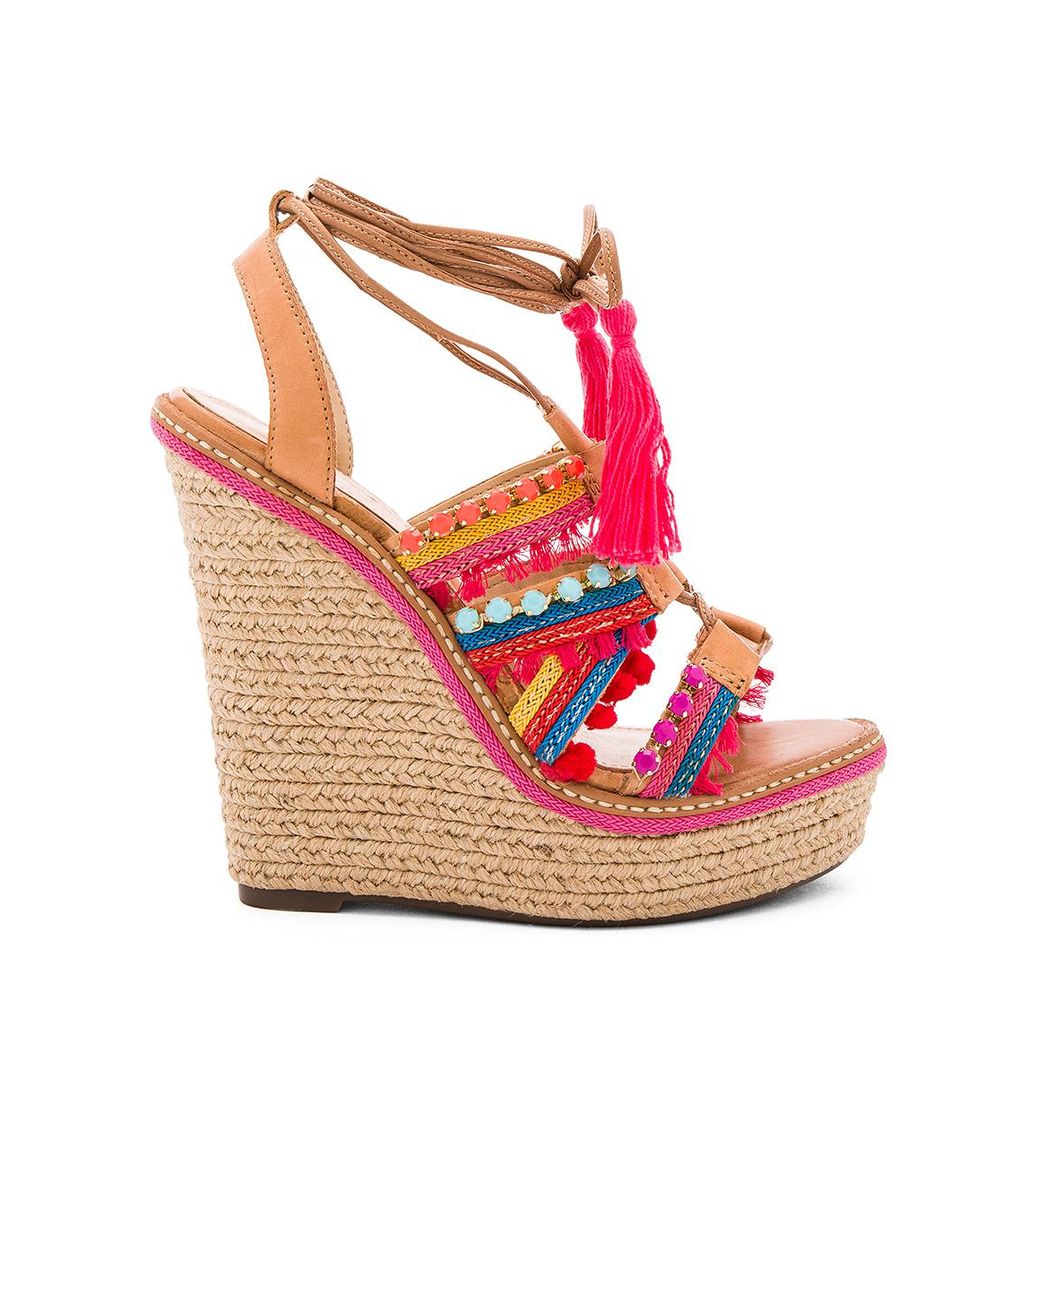 Schutz Mella Multi Color Bamboo Jeweled Leather Lace-Up Espadrille Wedge Sandals 